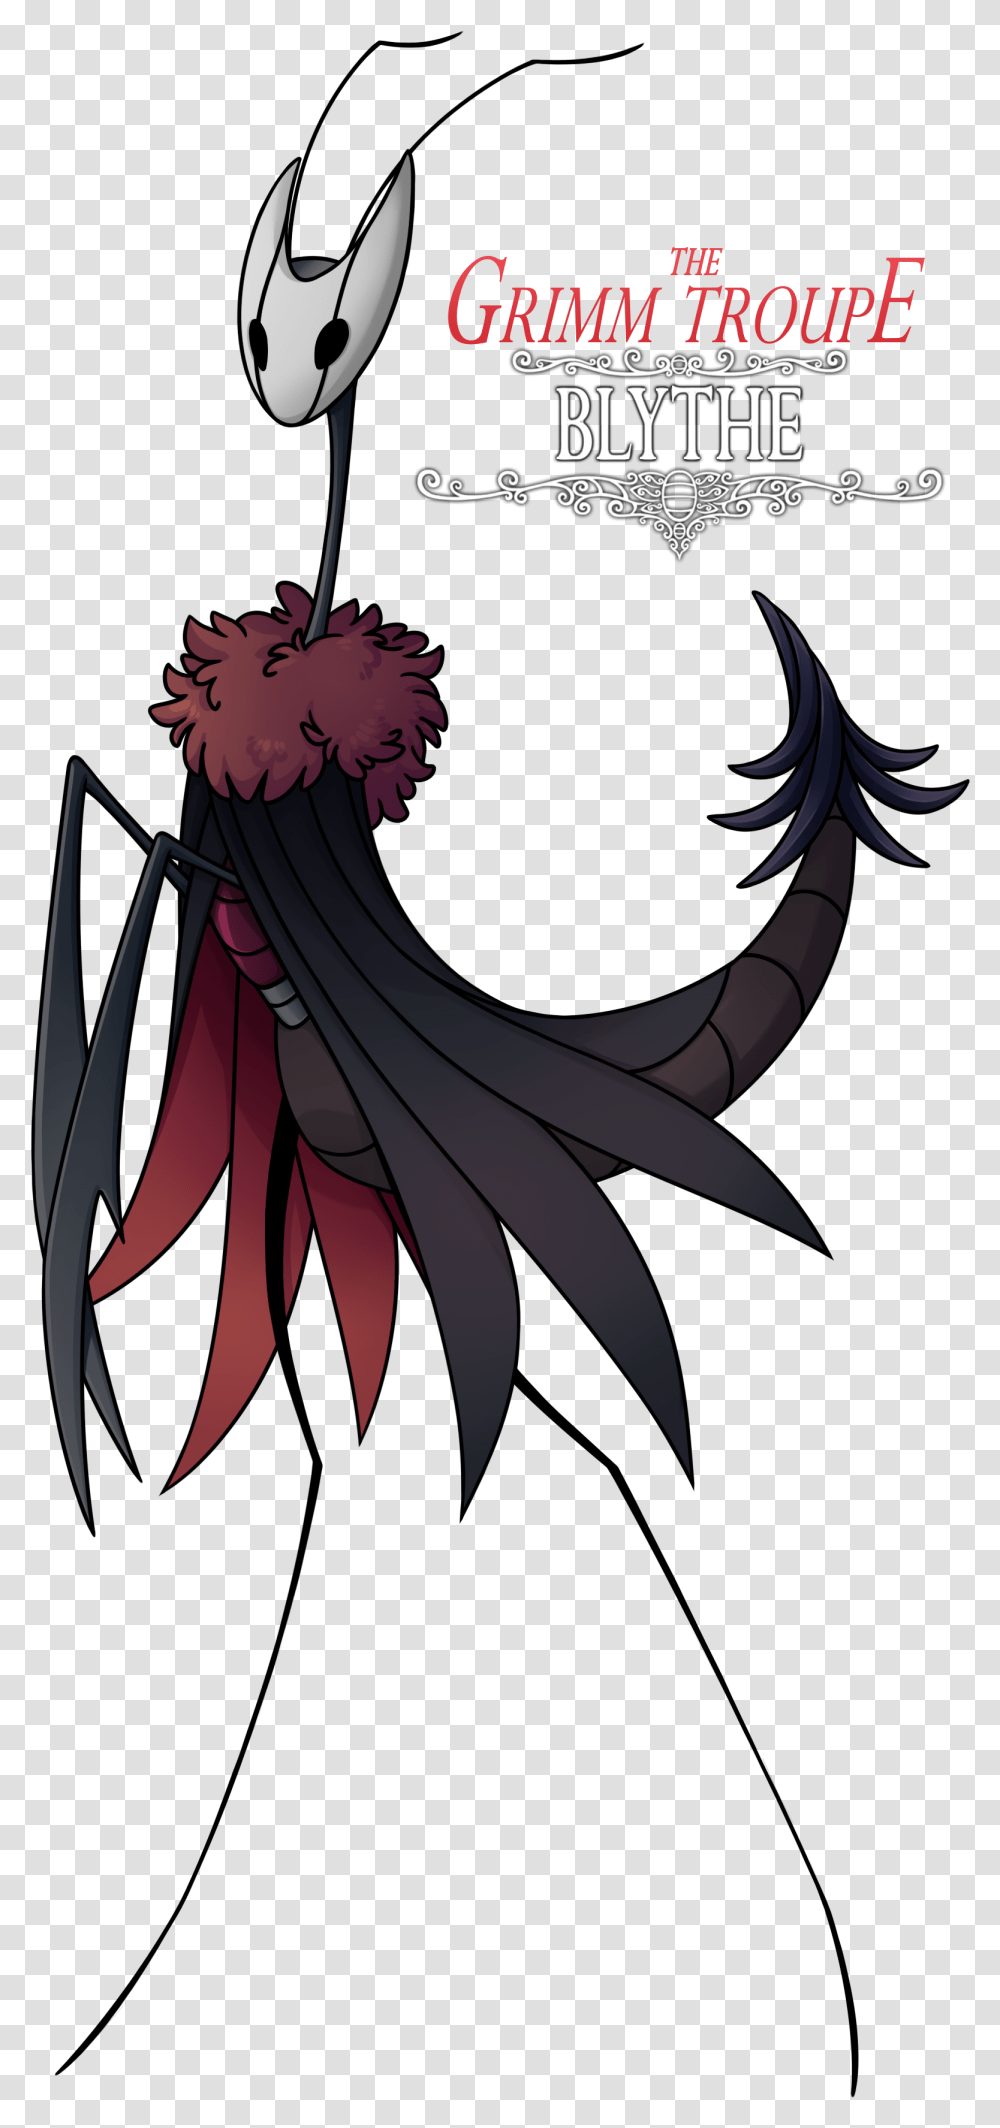 Mywnftltbqkavkp Hollow Knight Grimm Troupe Crowd, Dragon, Poster, Advertisement Transparent Png